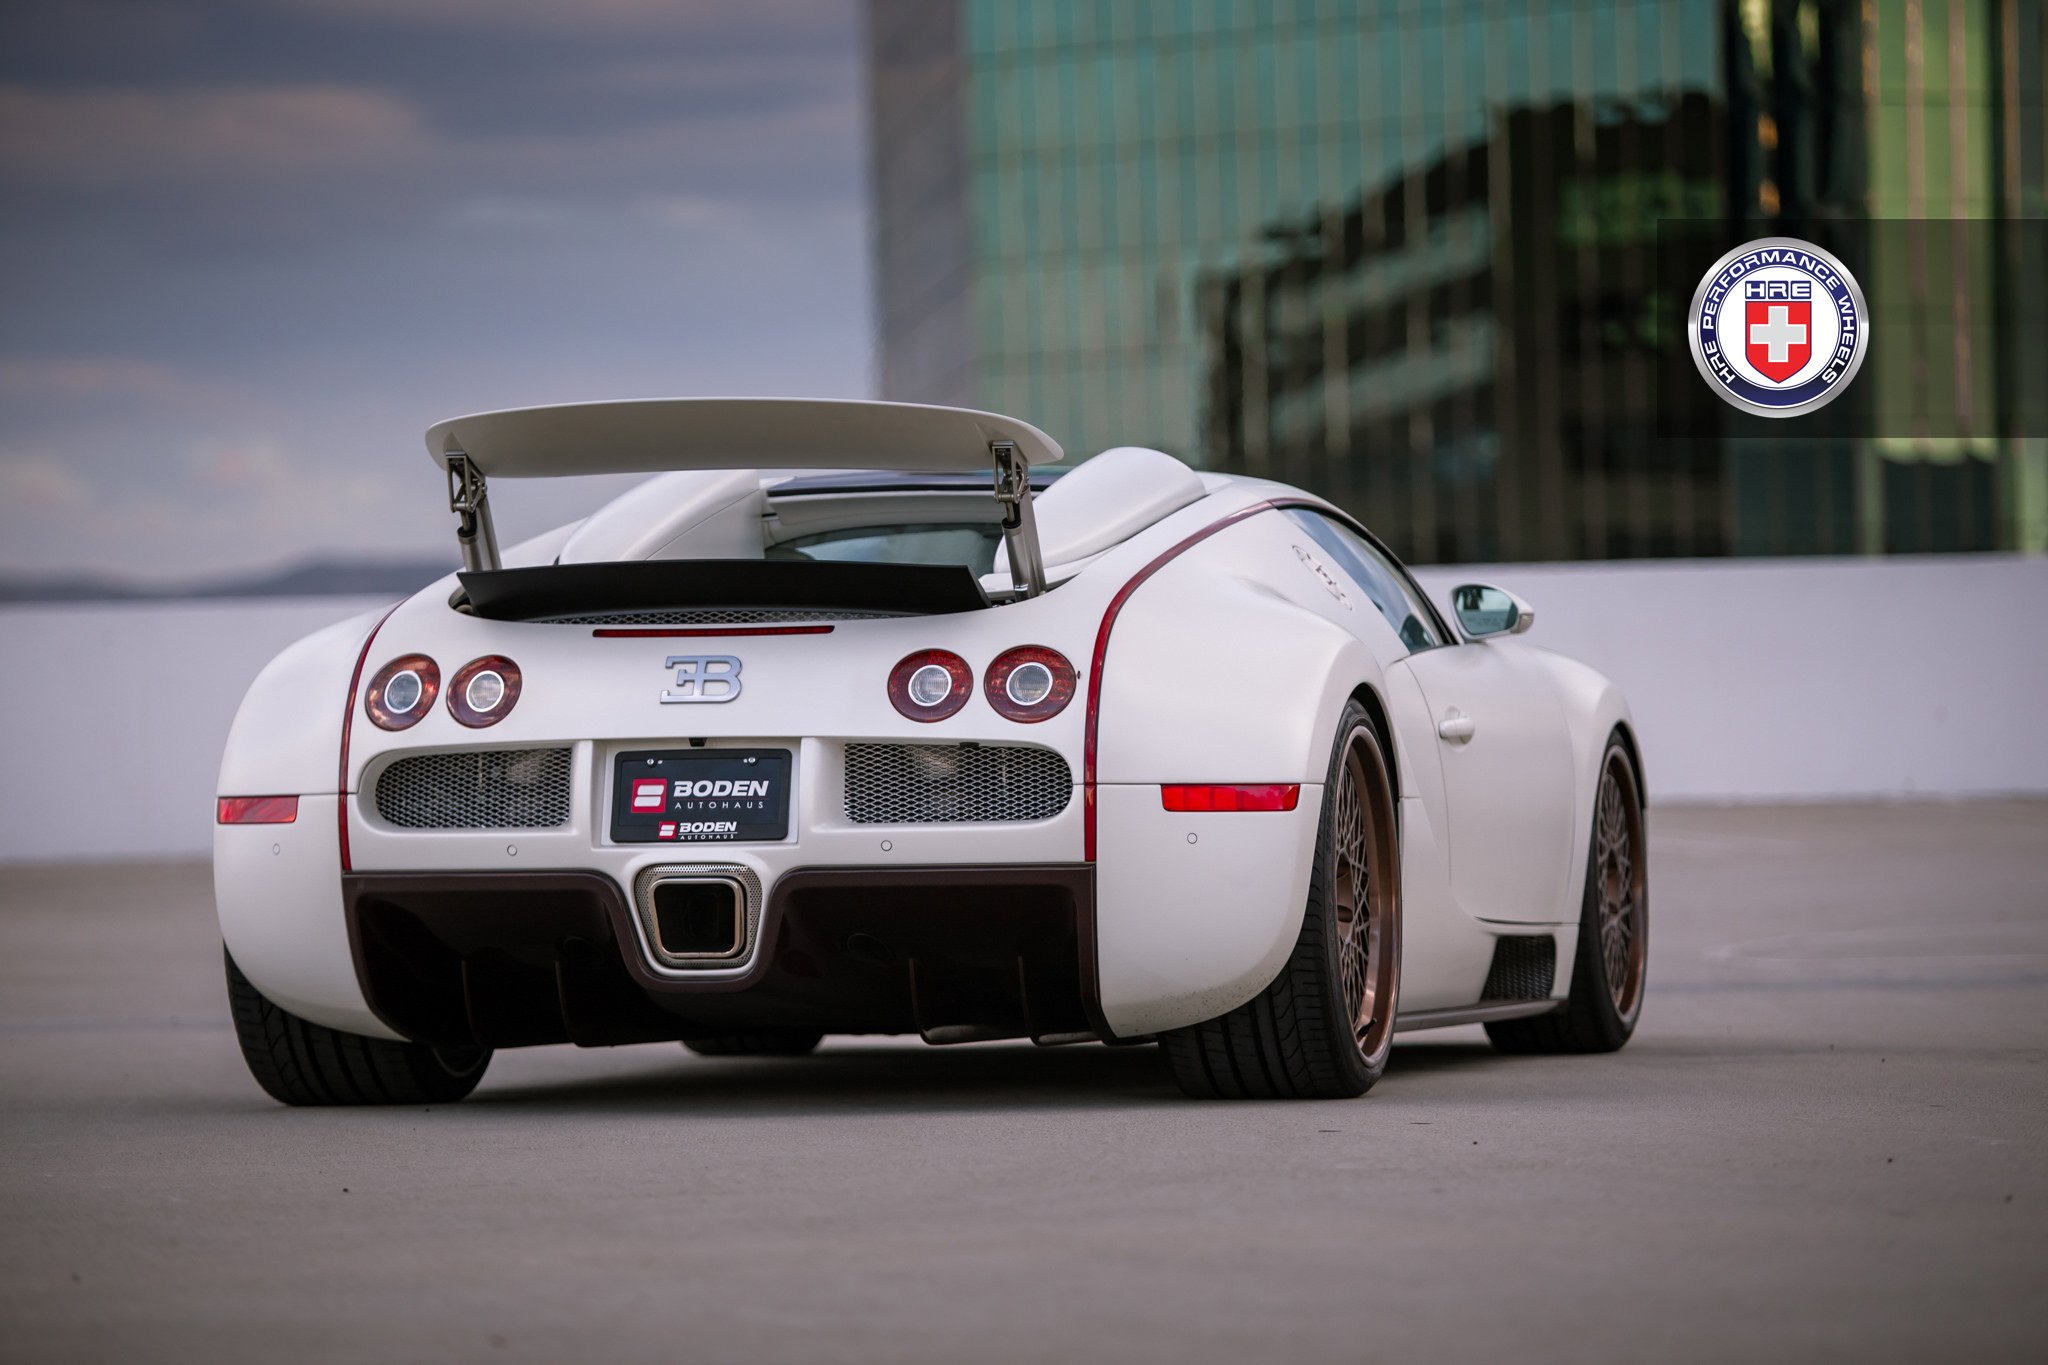 Aftermarket Rear Diffuser on White Bugatti Veyron - Photo by HRE Wheels